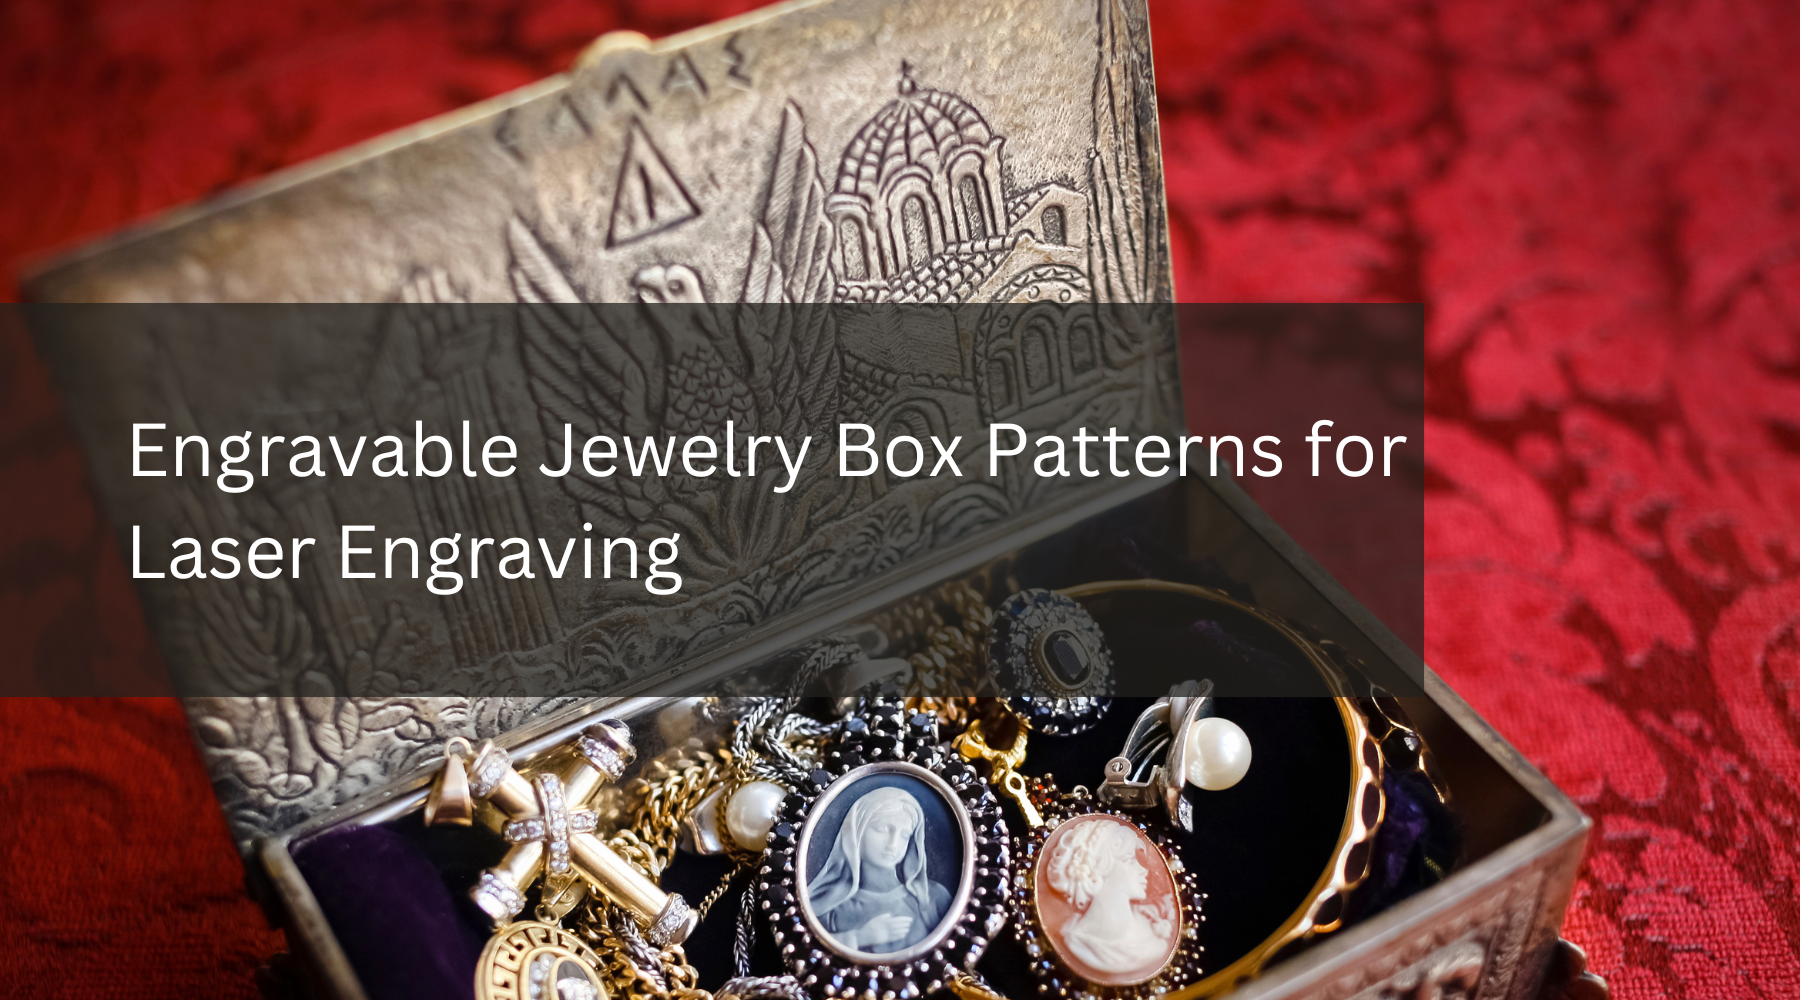 Engravable Jewelry Box Patterns for Laser Engraving